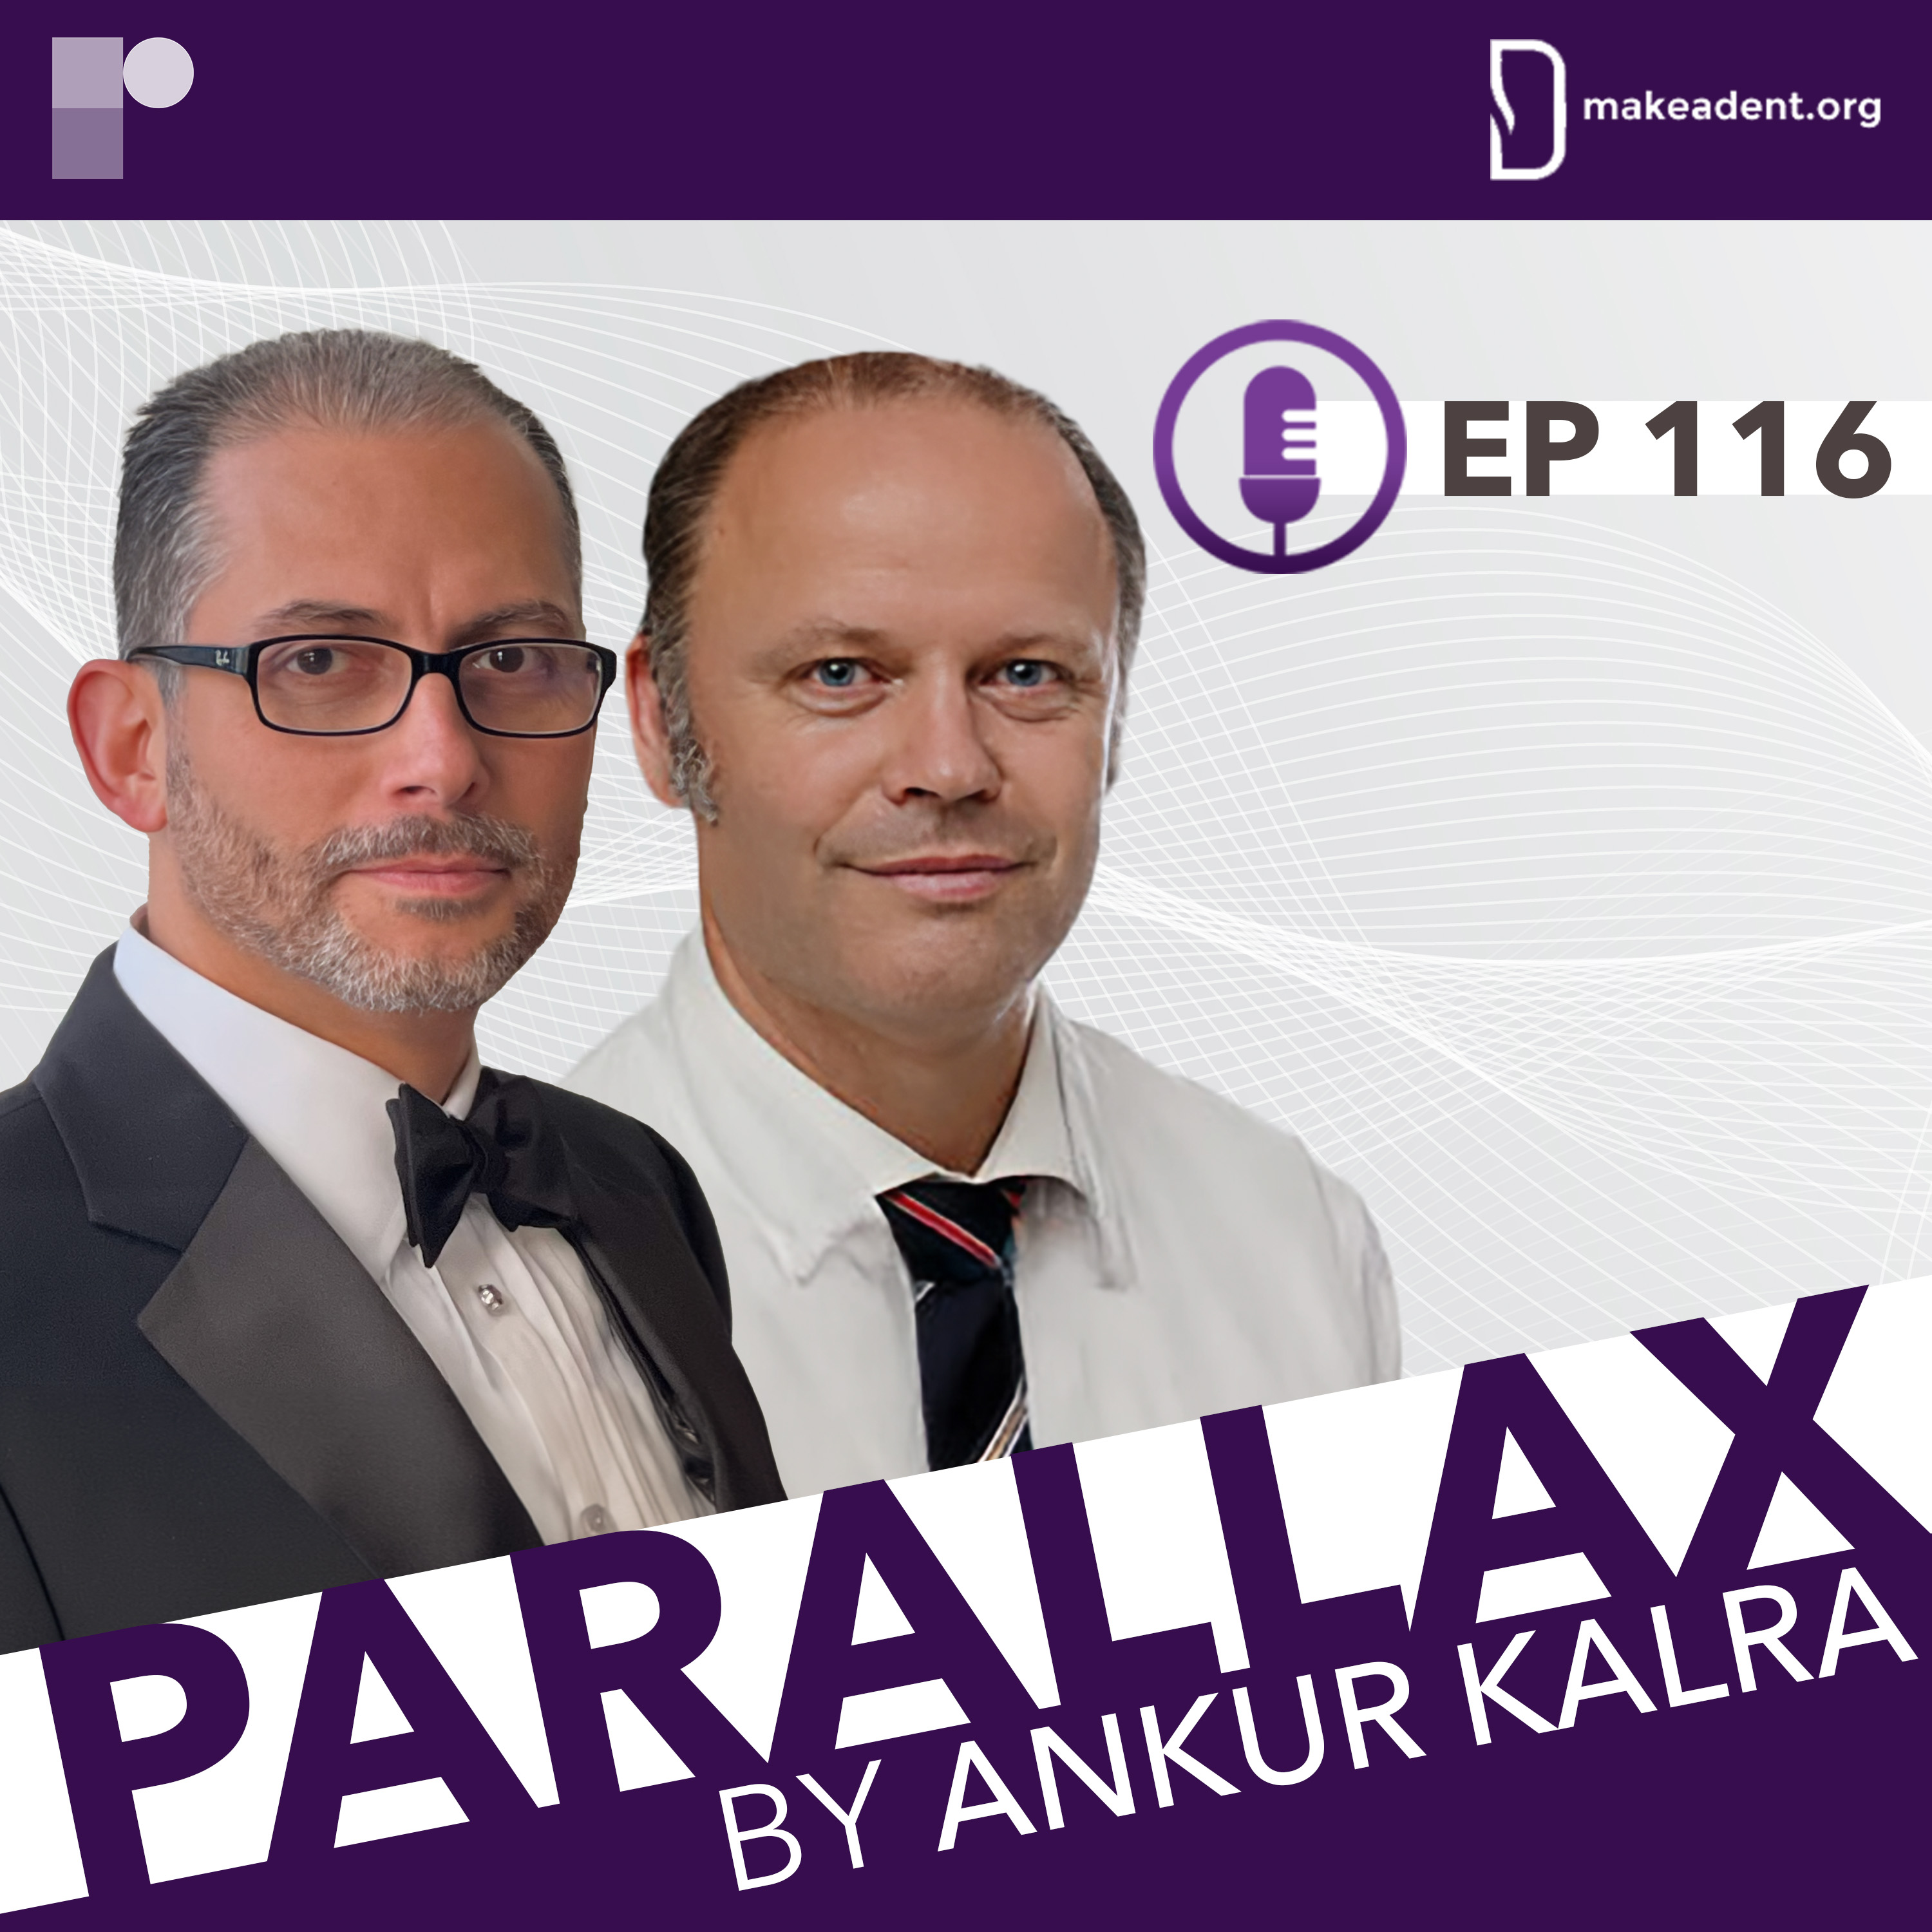 EP 116: Navigating the Realities of Guideline Directed Medical Therapy with Dr Chahoud and Dr Israel